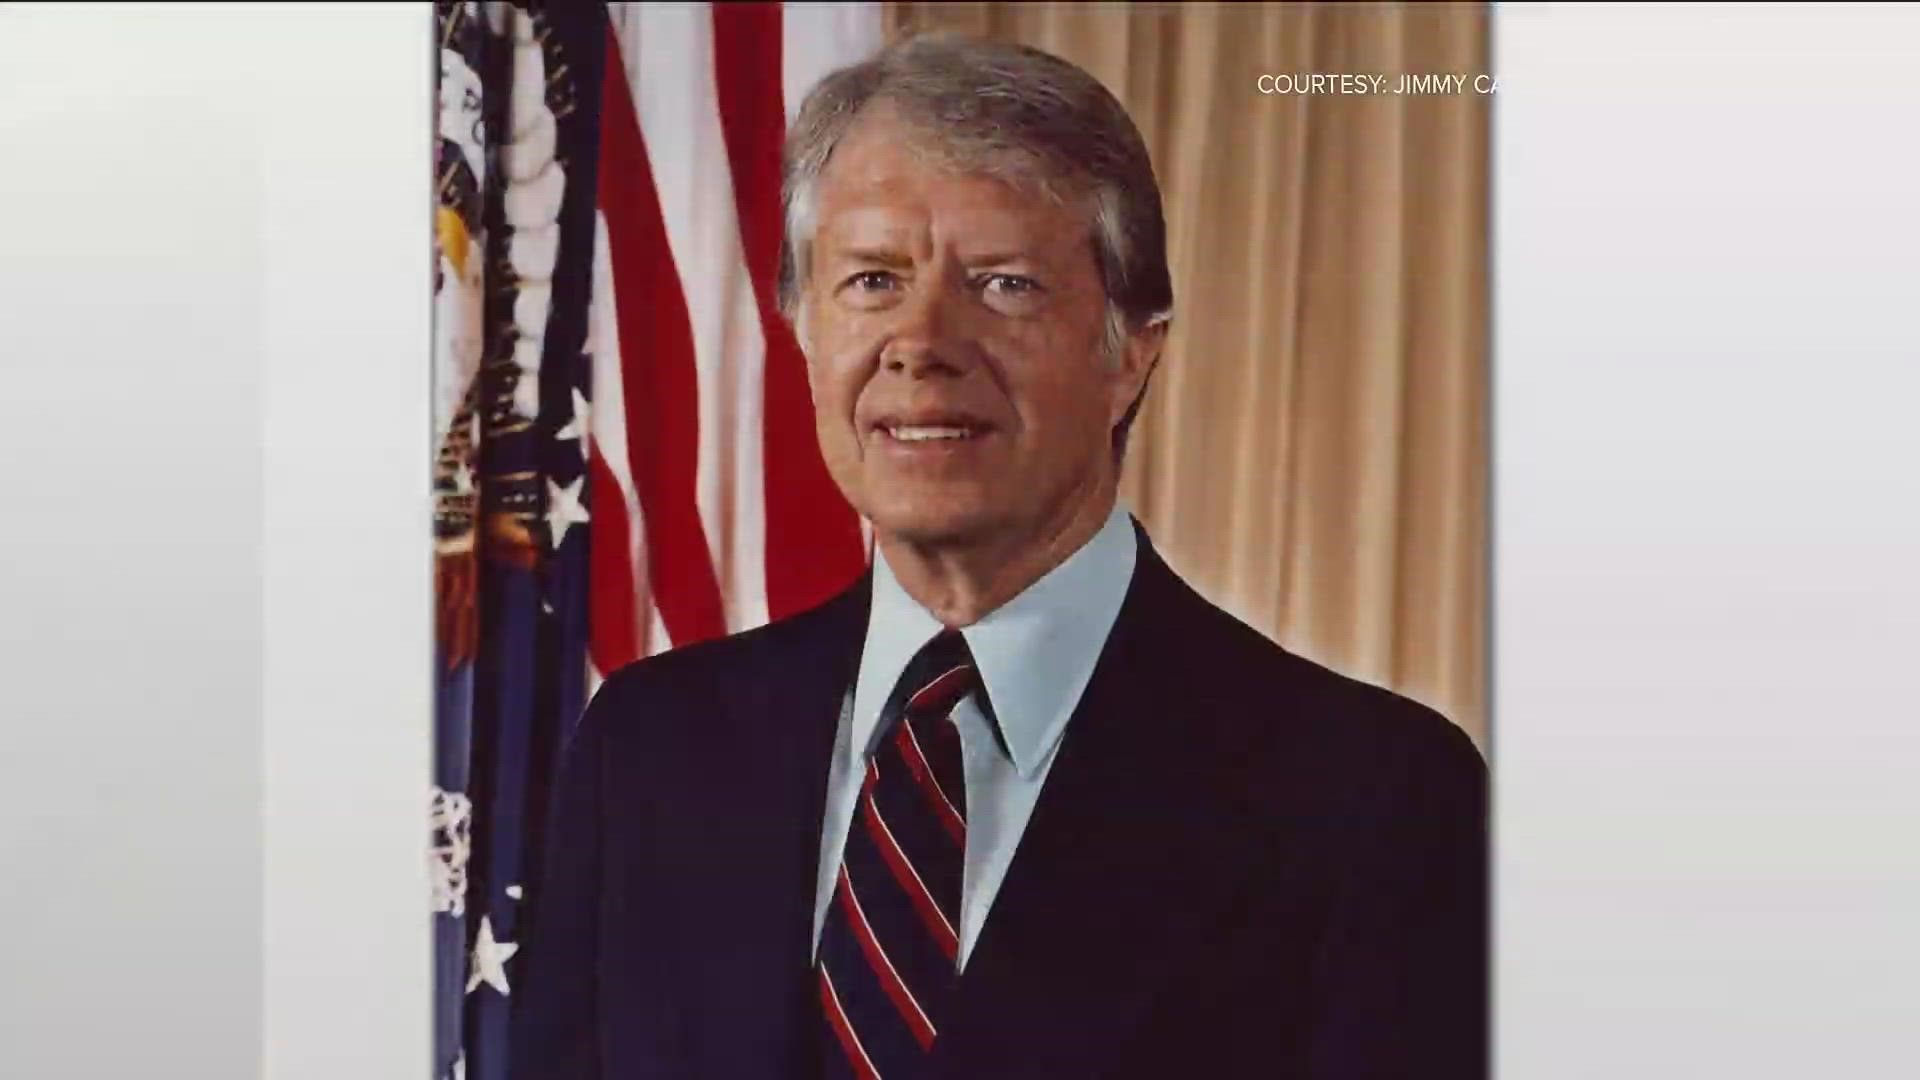 The Carter Center said in a statement Saturday that the 39th president will receive hospice care instead of "additional" medical intervention.